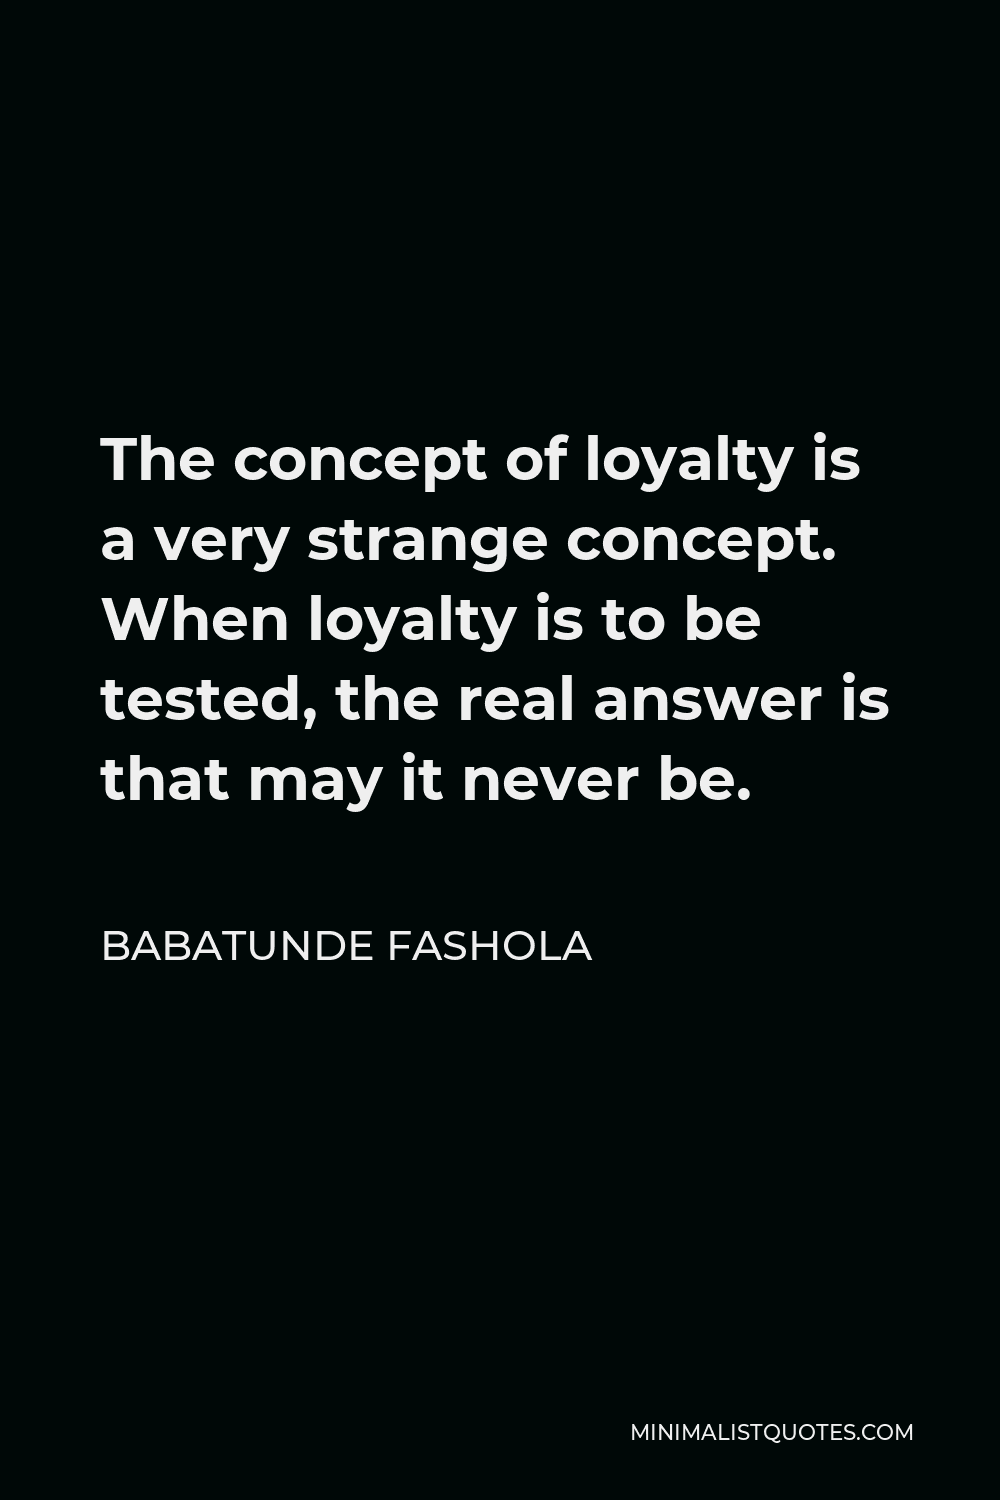 Babatunde Fashola Quote - The concept of loyalty is a very strange concept. When loyalty is to be tested, the real answer is that may it never be.